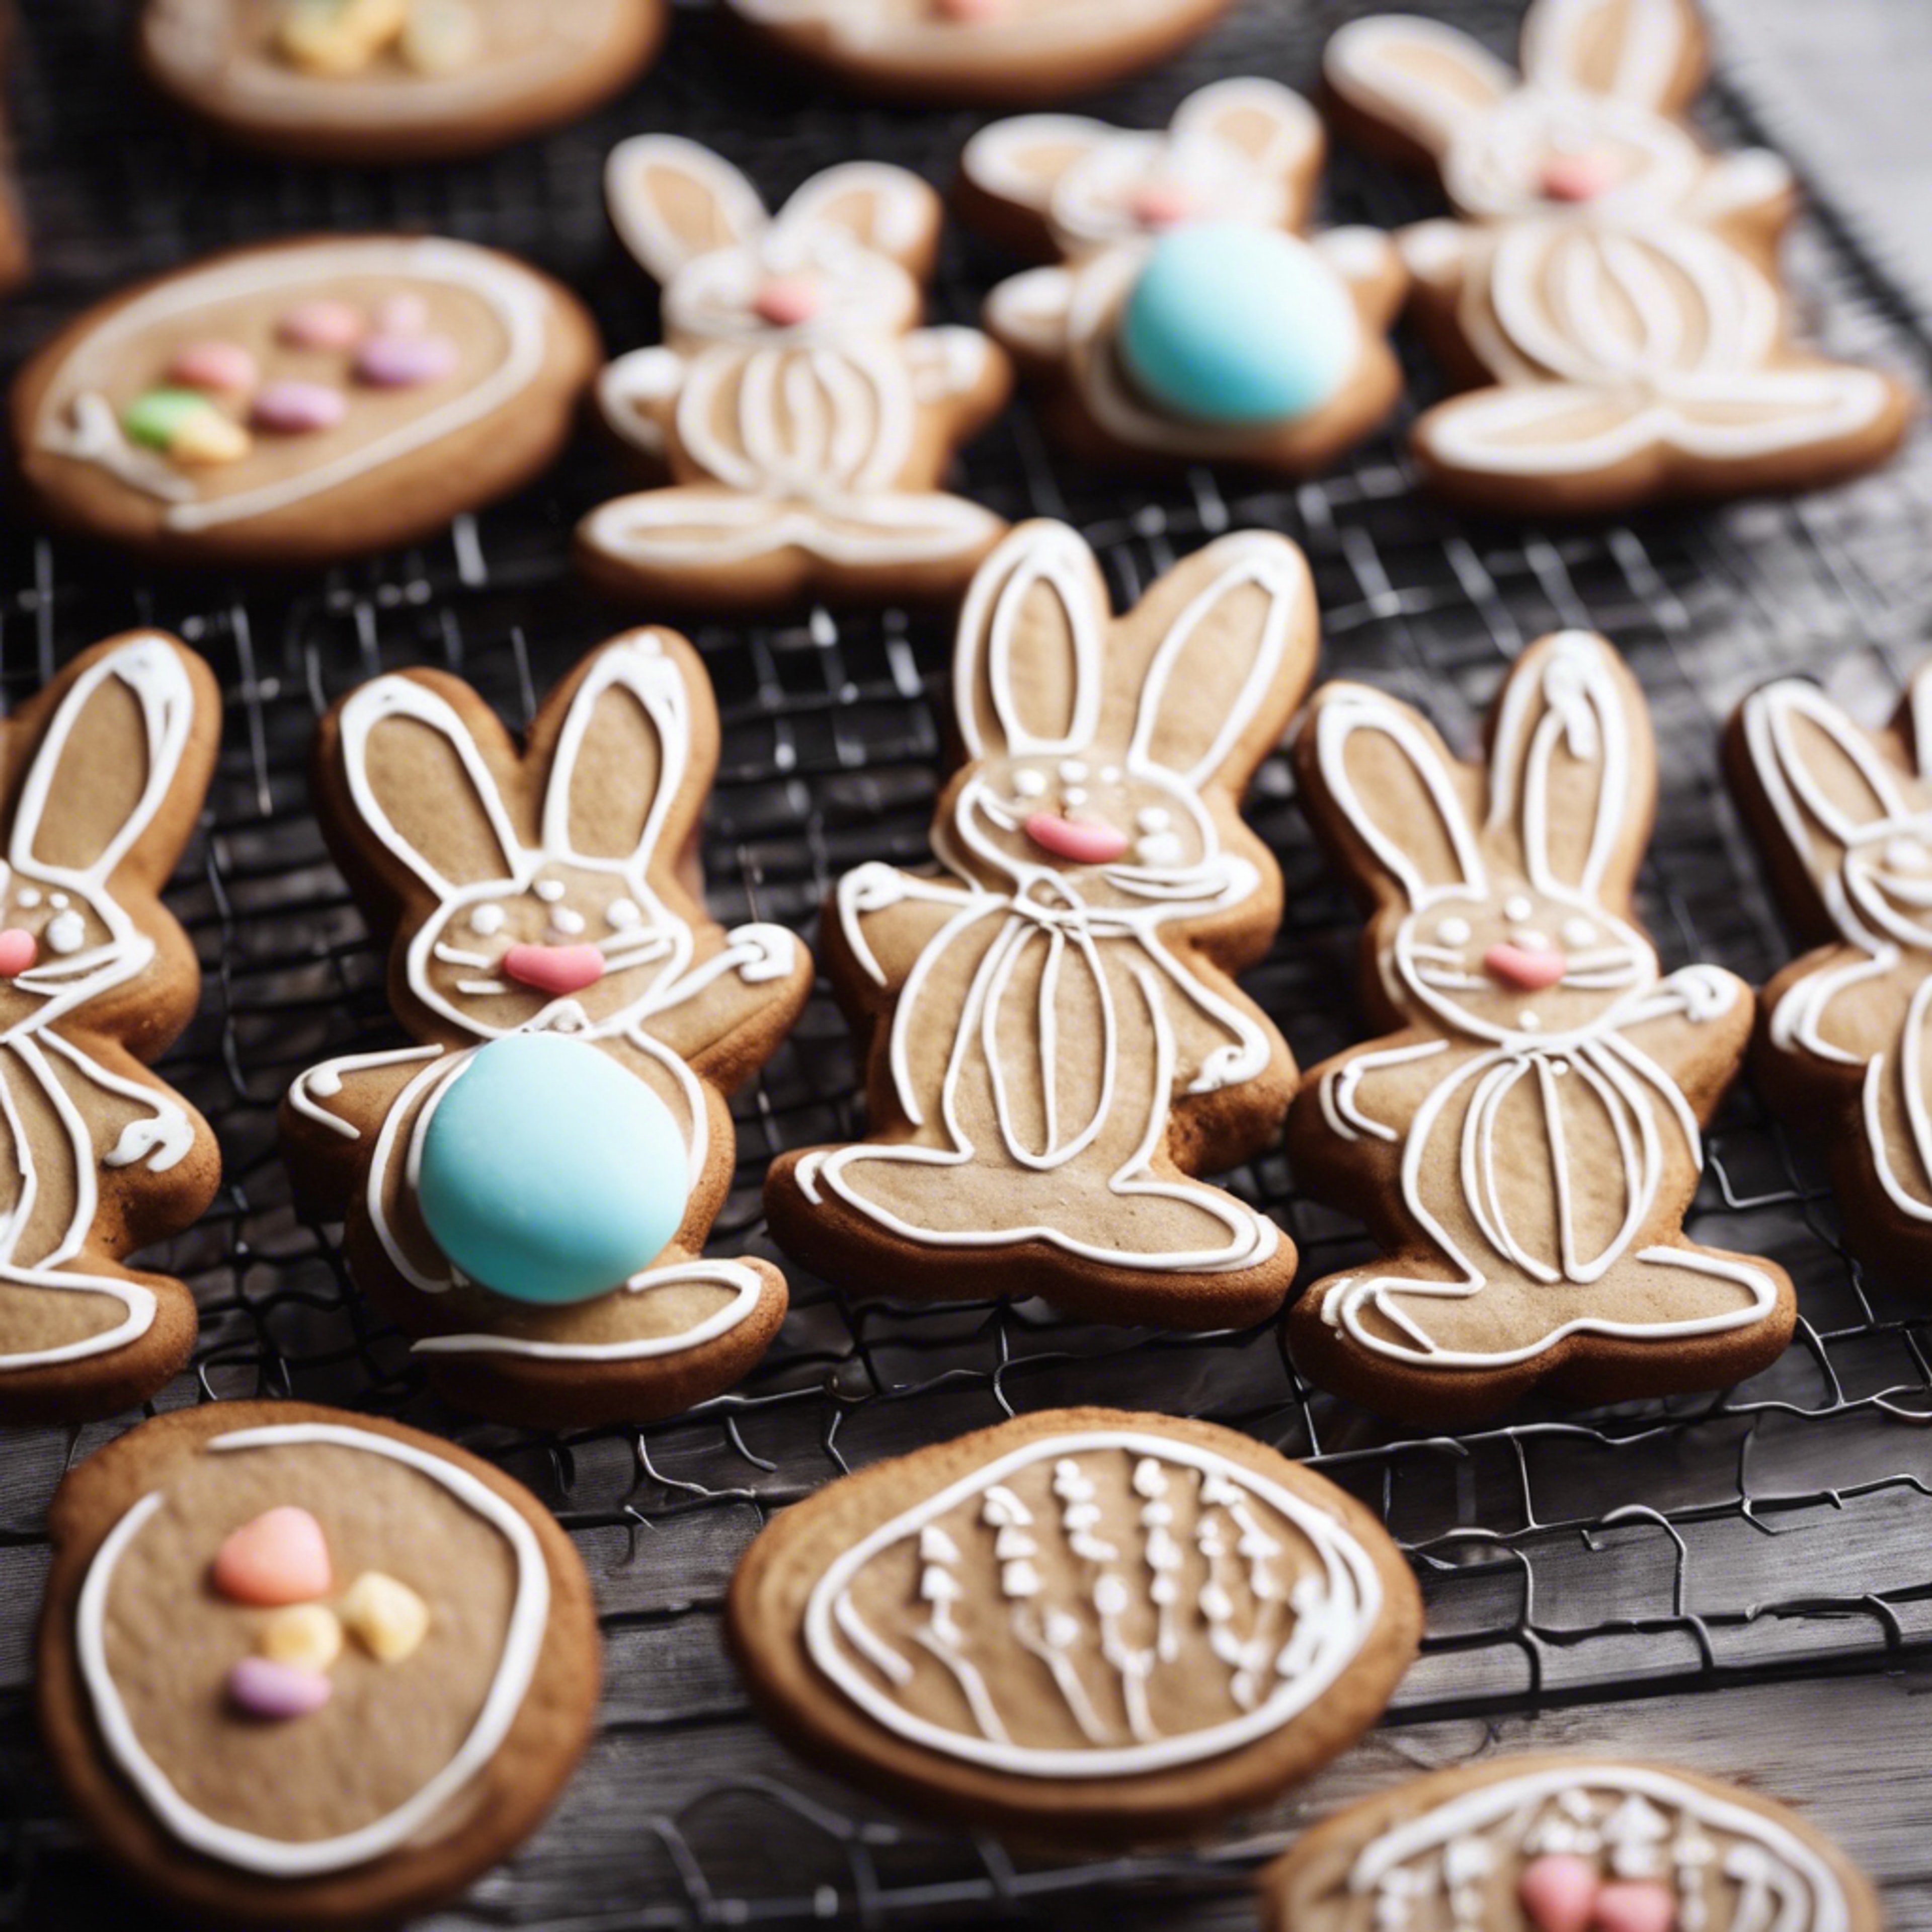 Homemade gingerbread cookies shaped like Easter bunnies and eggs, cooling on a rack. Sfondo[c62694eb033d400aa62f]